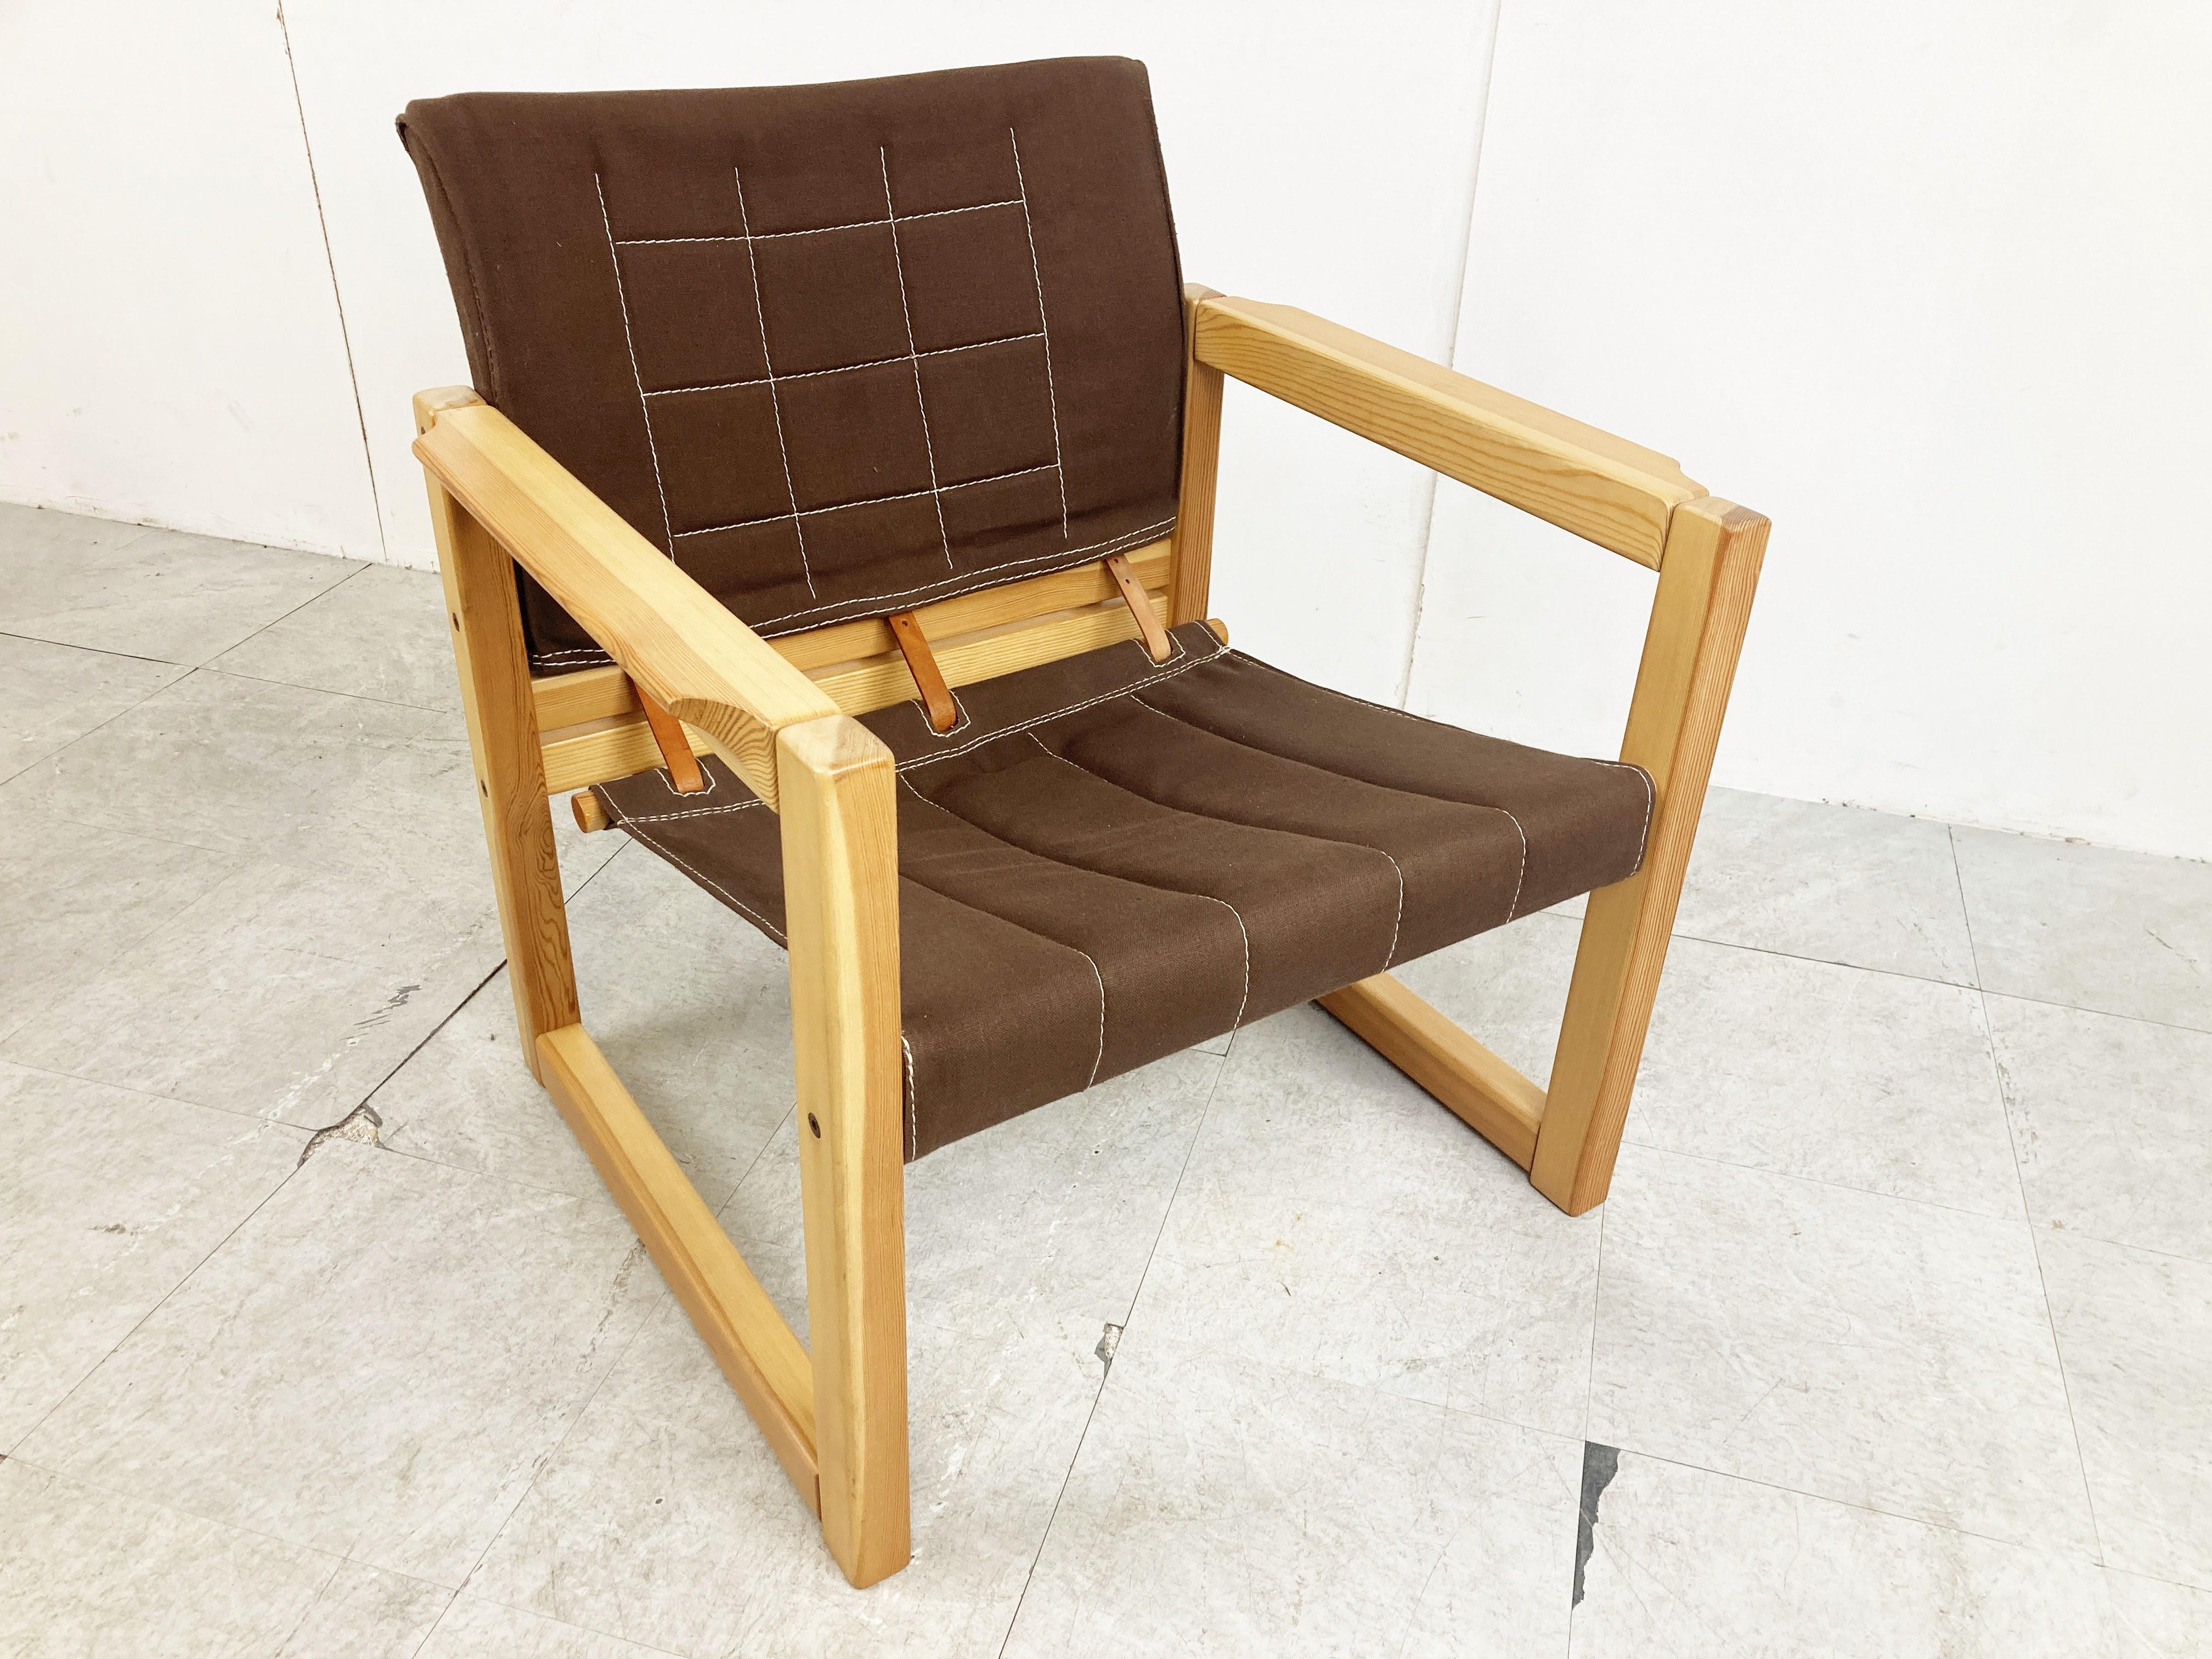 Charming pair of so called 'safari' armchairs designed by Karin Mobring for Ikea. The chair's model name is 'Diana'

Made from solid pine wood frames with brown fabric canvas upholstery.

A nice design feature are the leather straps at the